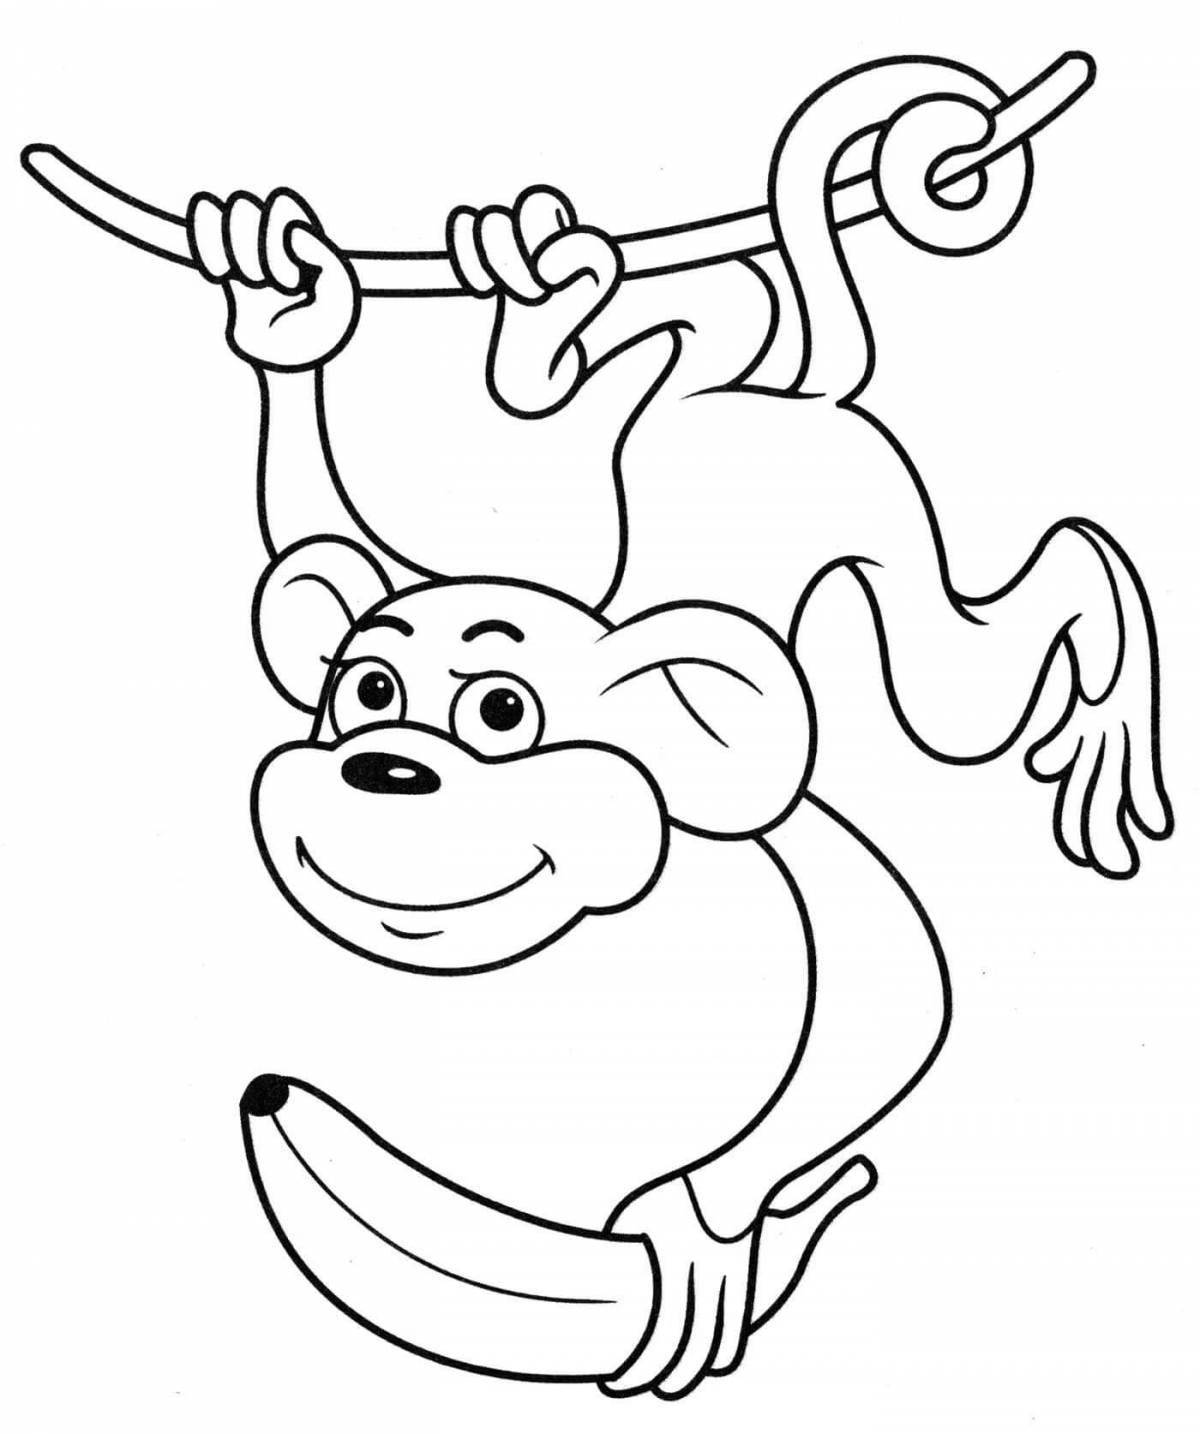 Great monkey coloring book